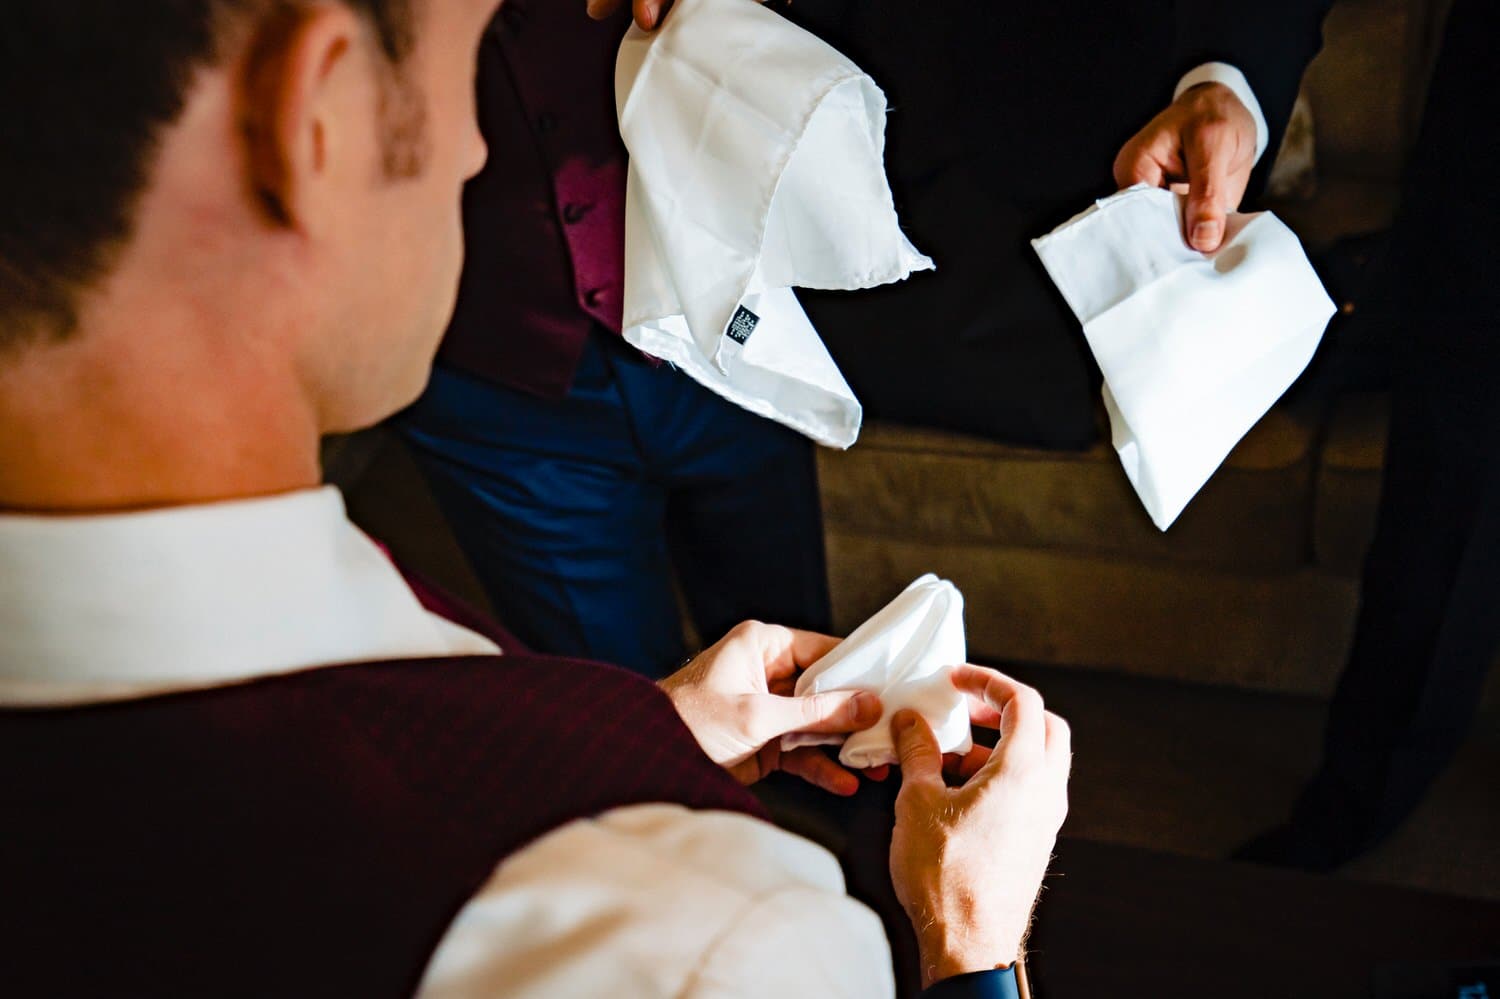 A colorful, candid picture of three men attempting to fold the pocket squares of their tuxedos on a wedding day. 